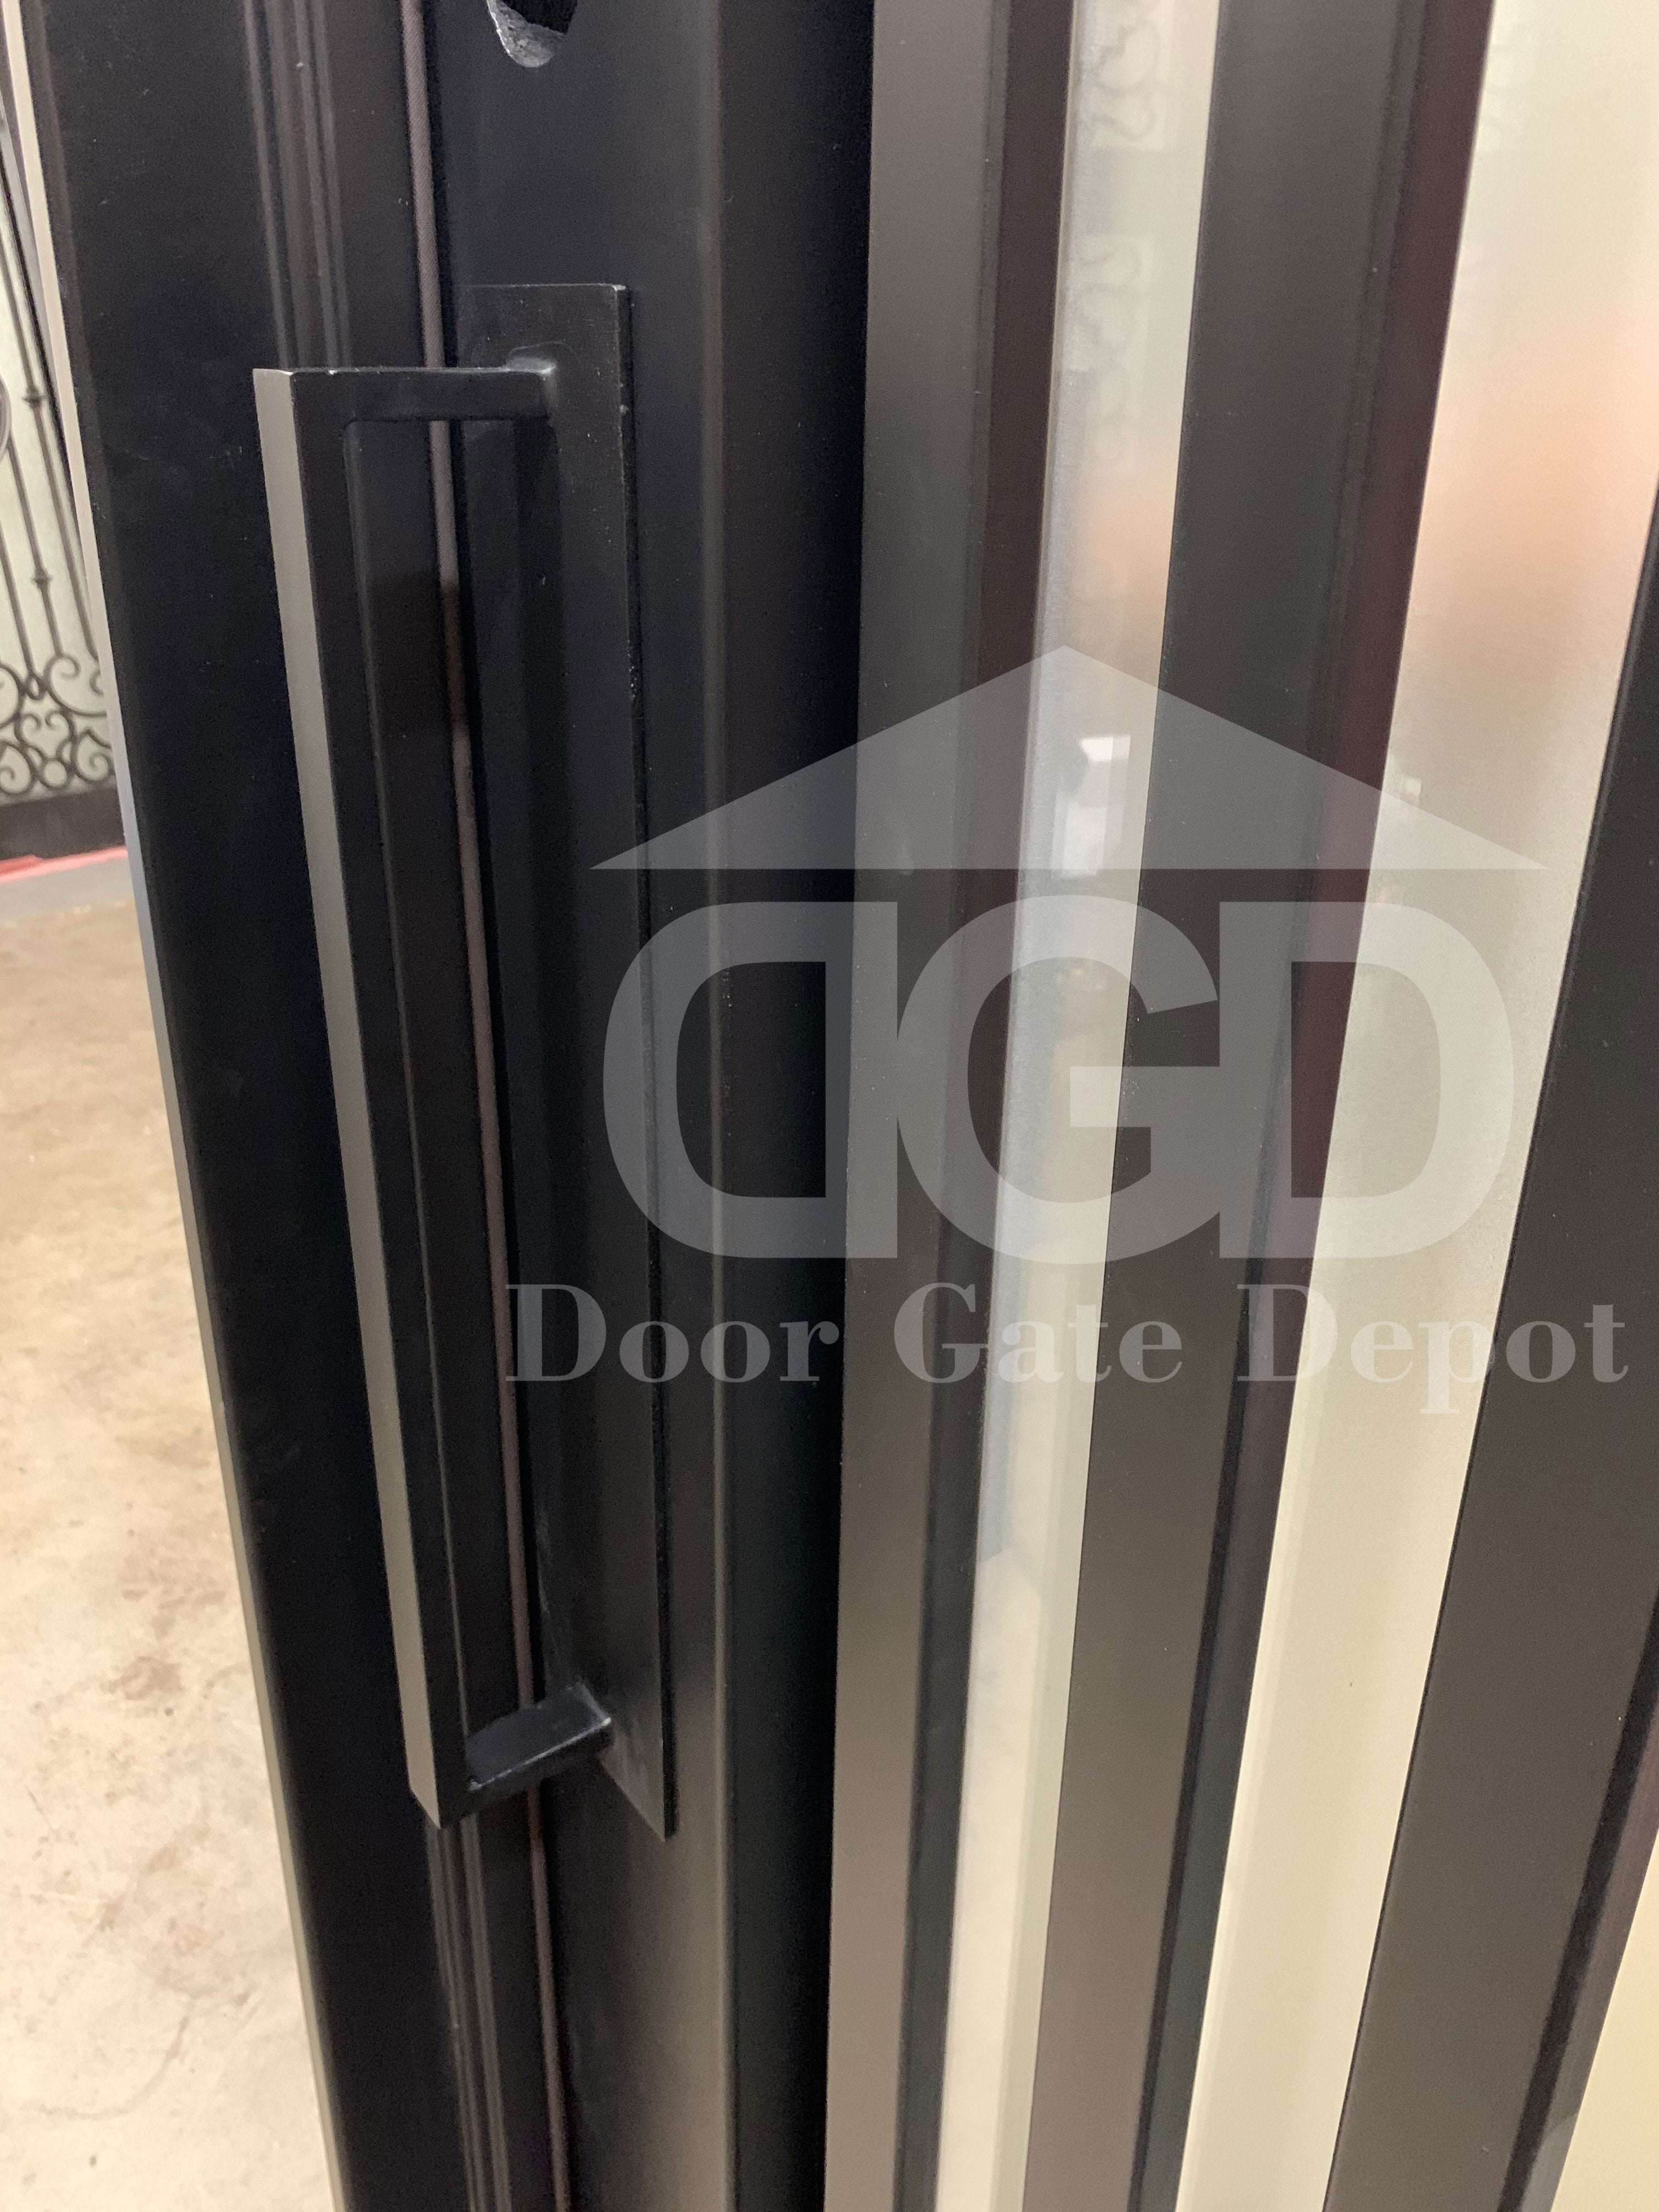 IVY -flat top, prehung, removable bug screen, front entry single wrought iron door- 38x96 Right Hand - Door Gate Depot